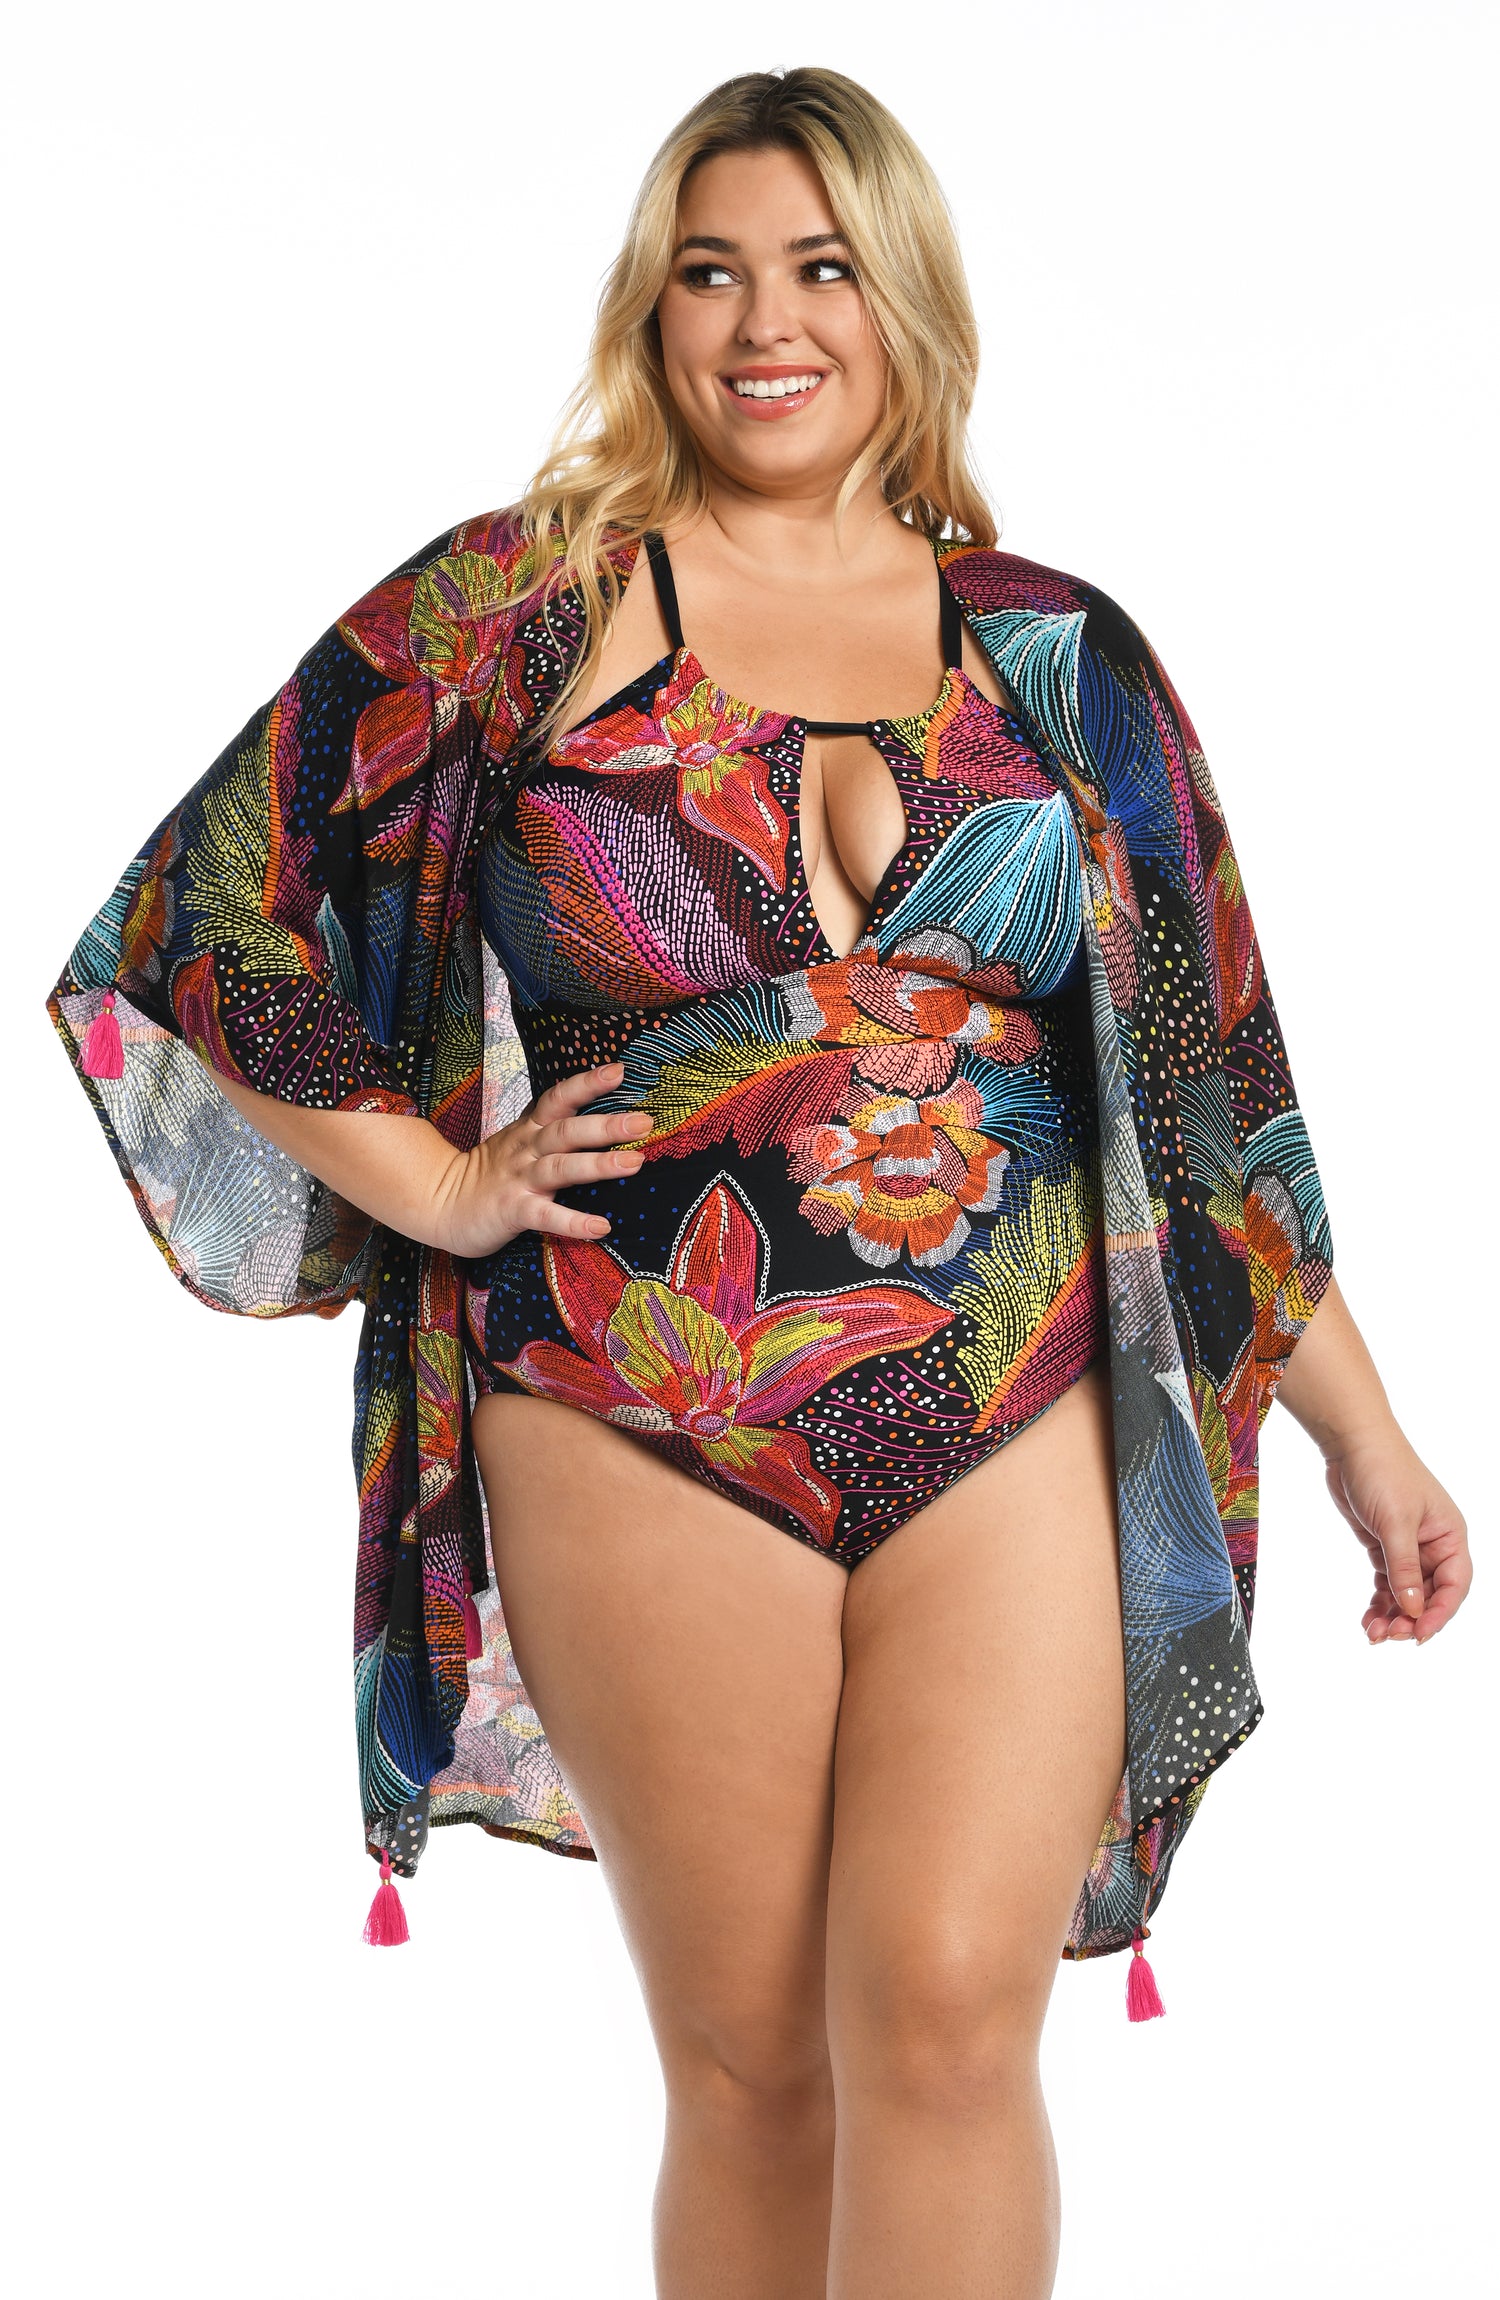 Model is wearing a shiny multicolored tropical printed kimono cover up from our Sunlit Soriee collection!